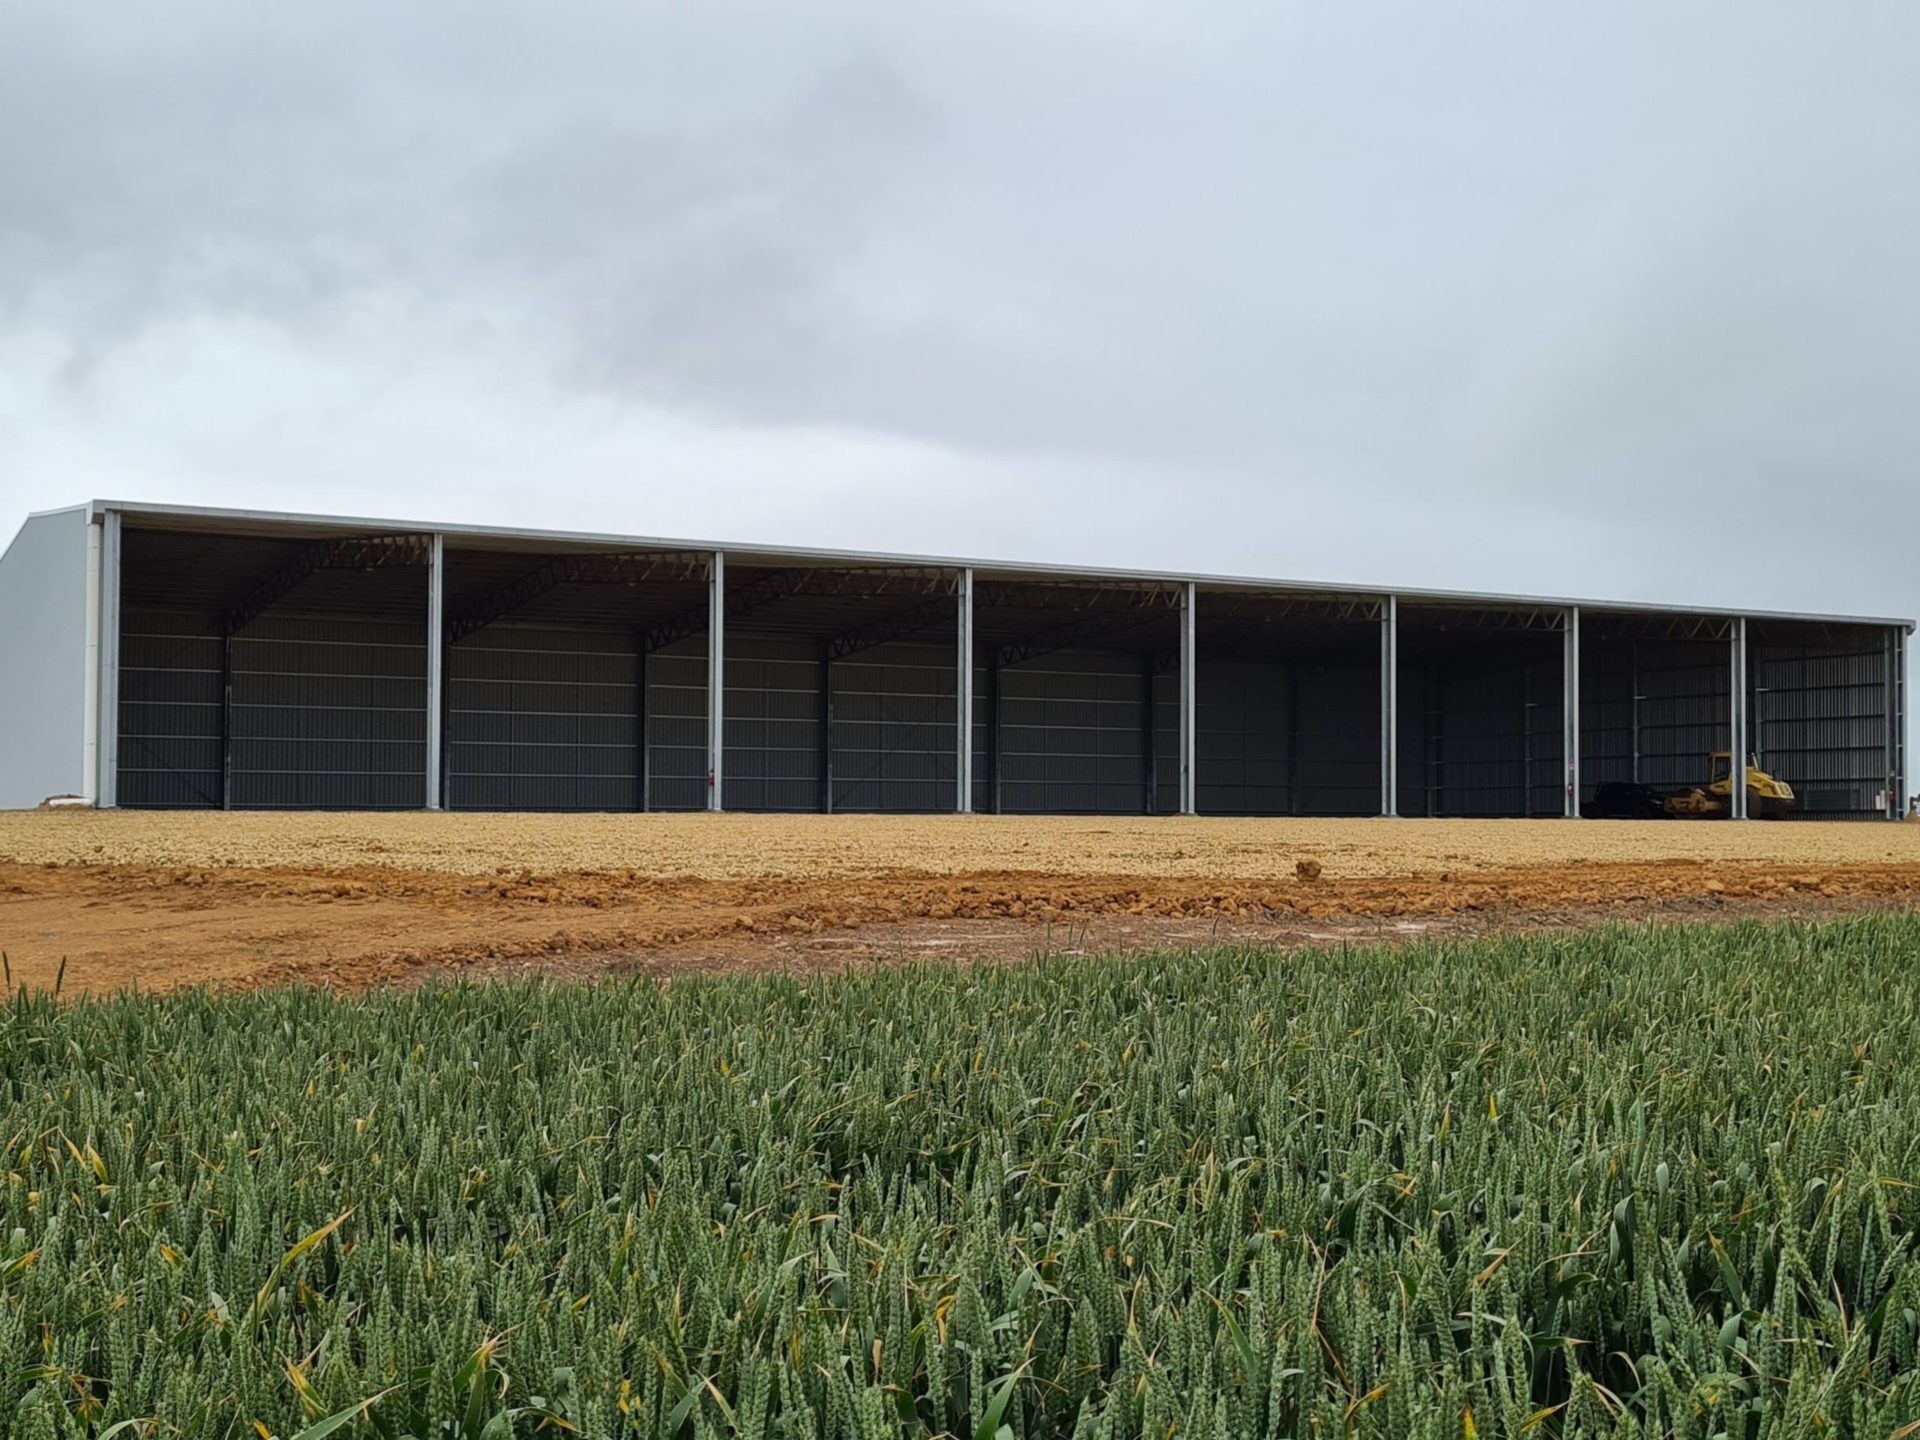 You are currently viewing 68m x 30m x 8m open-front hay shed